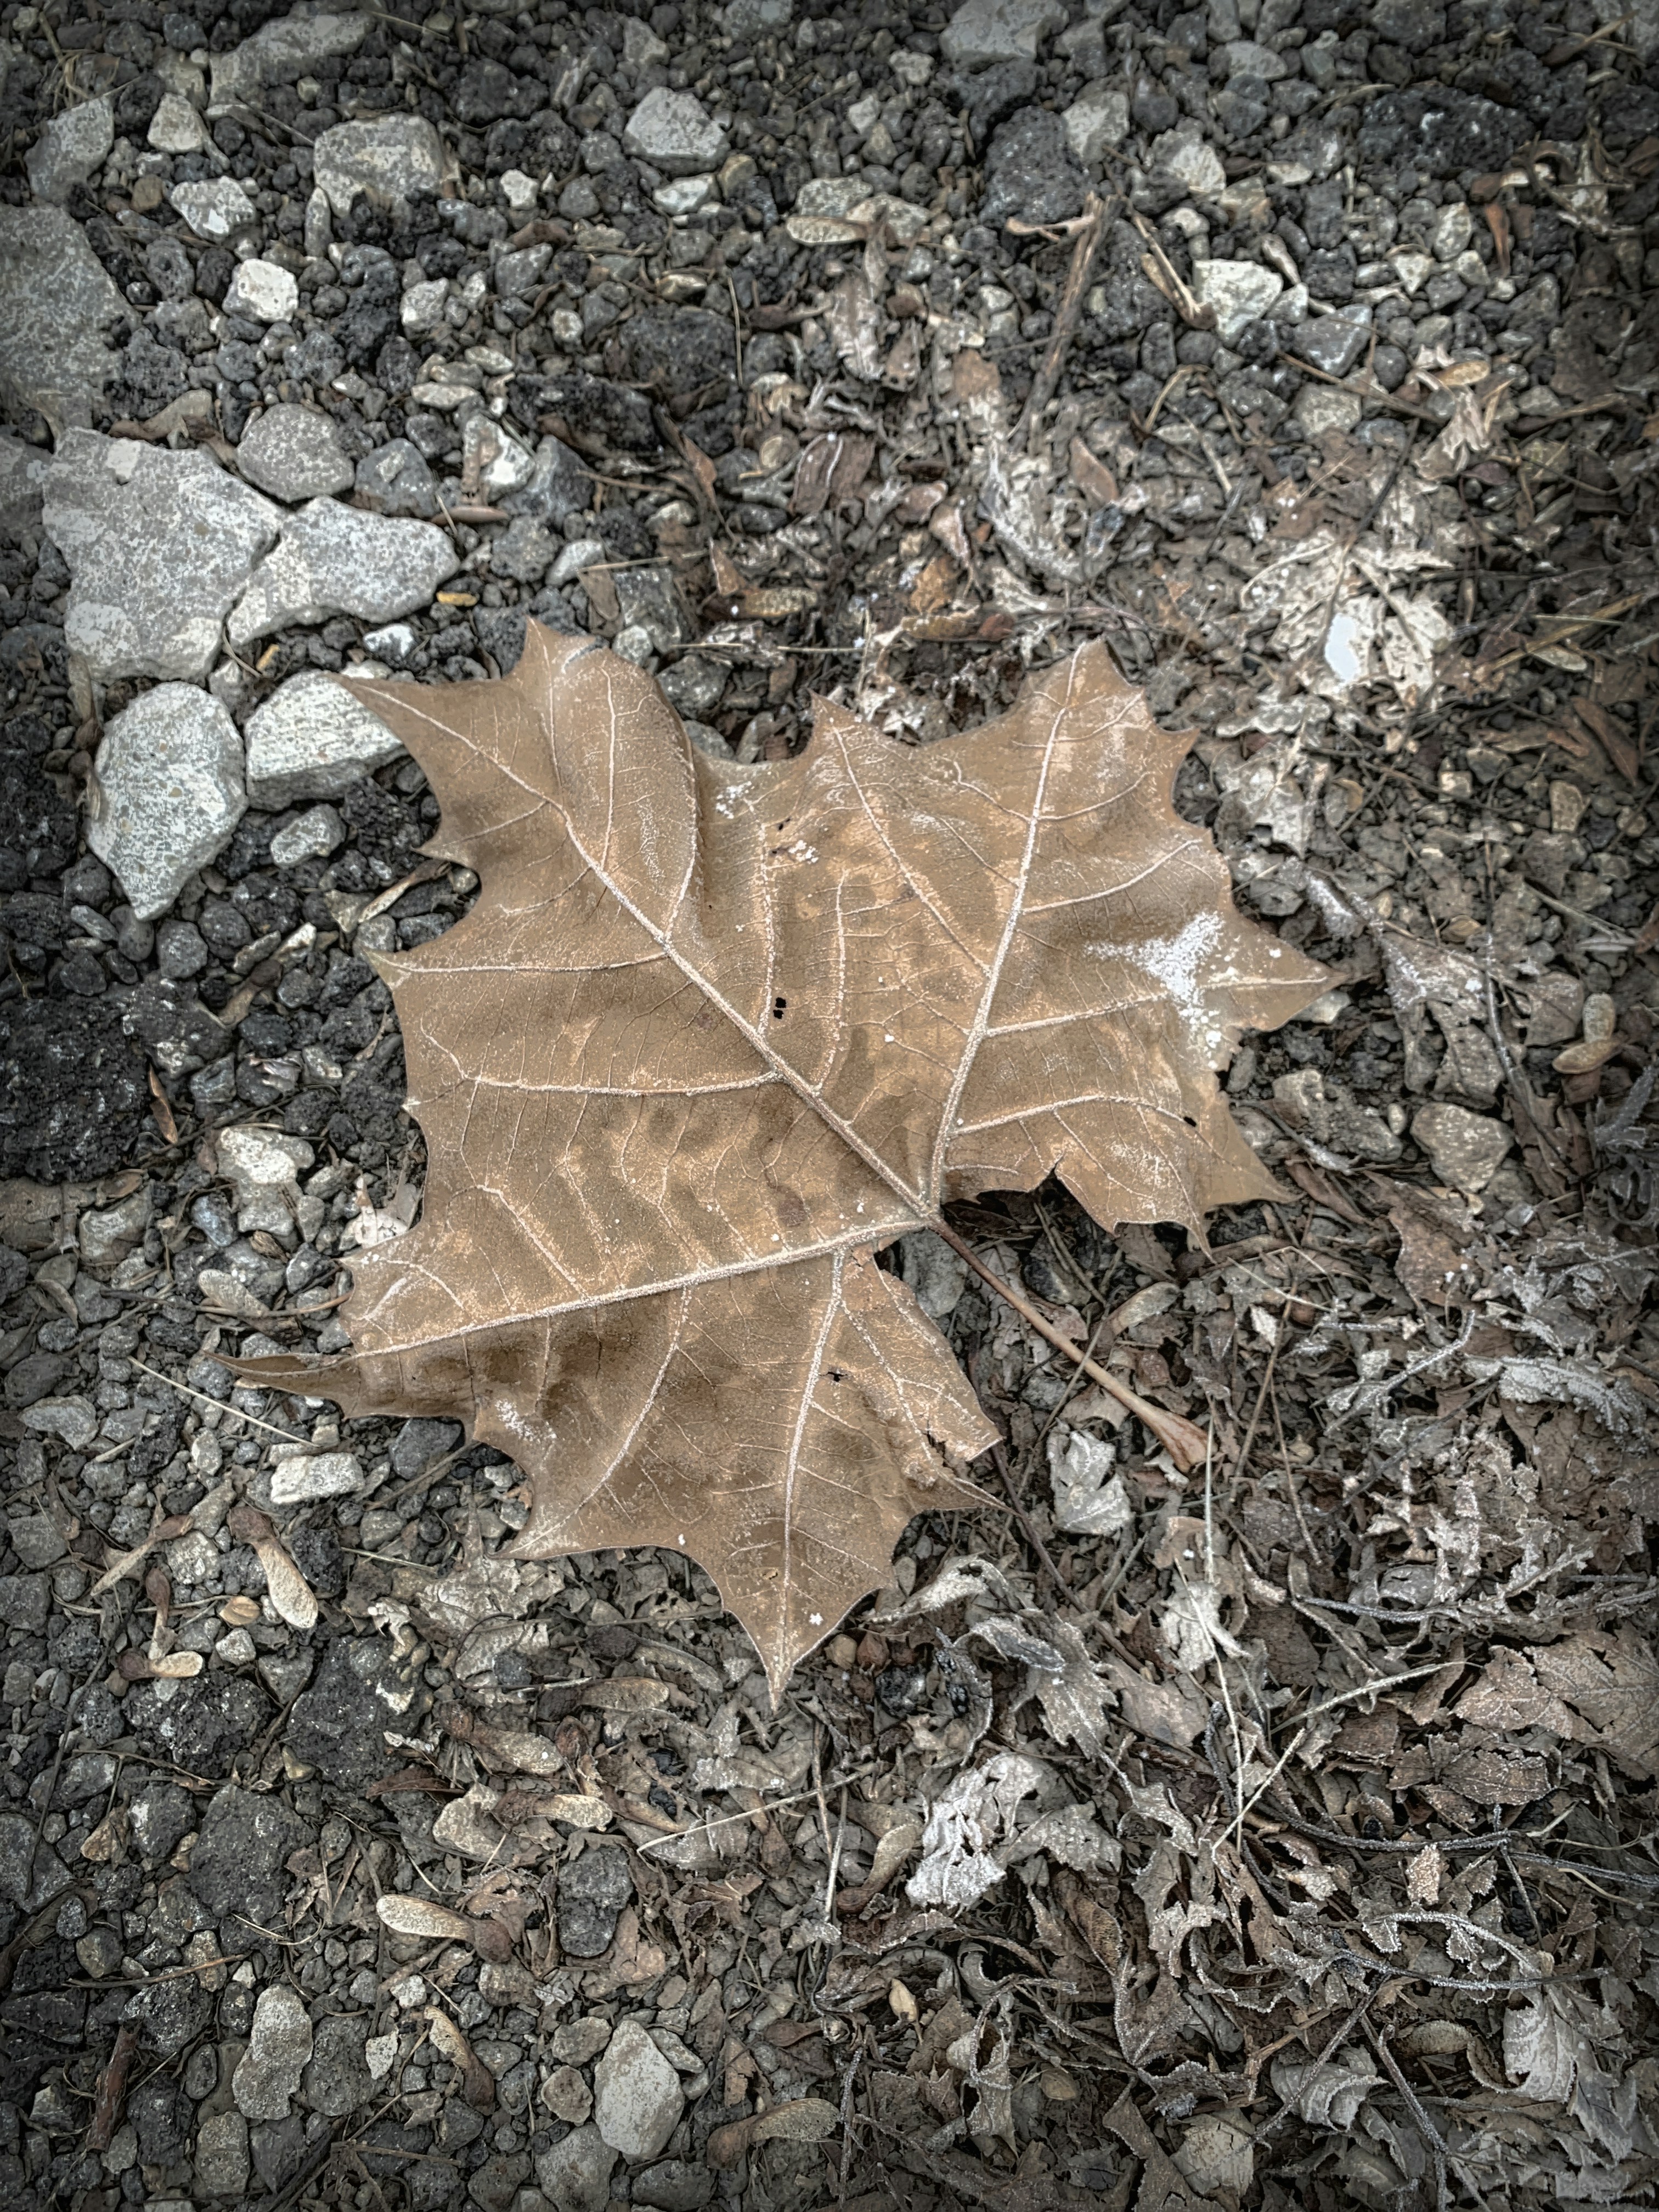 This frozen brown leaf stood out in contrast, as it rested gently on the rough black black soil beneath it.